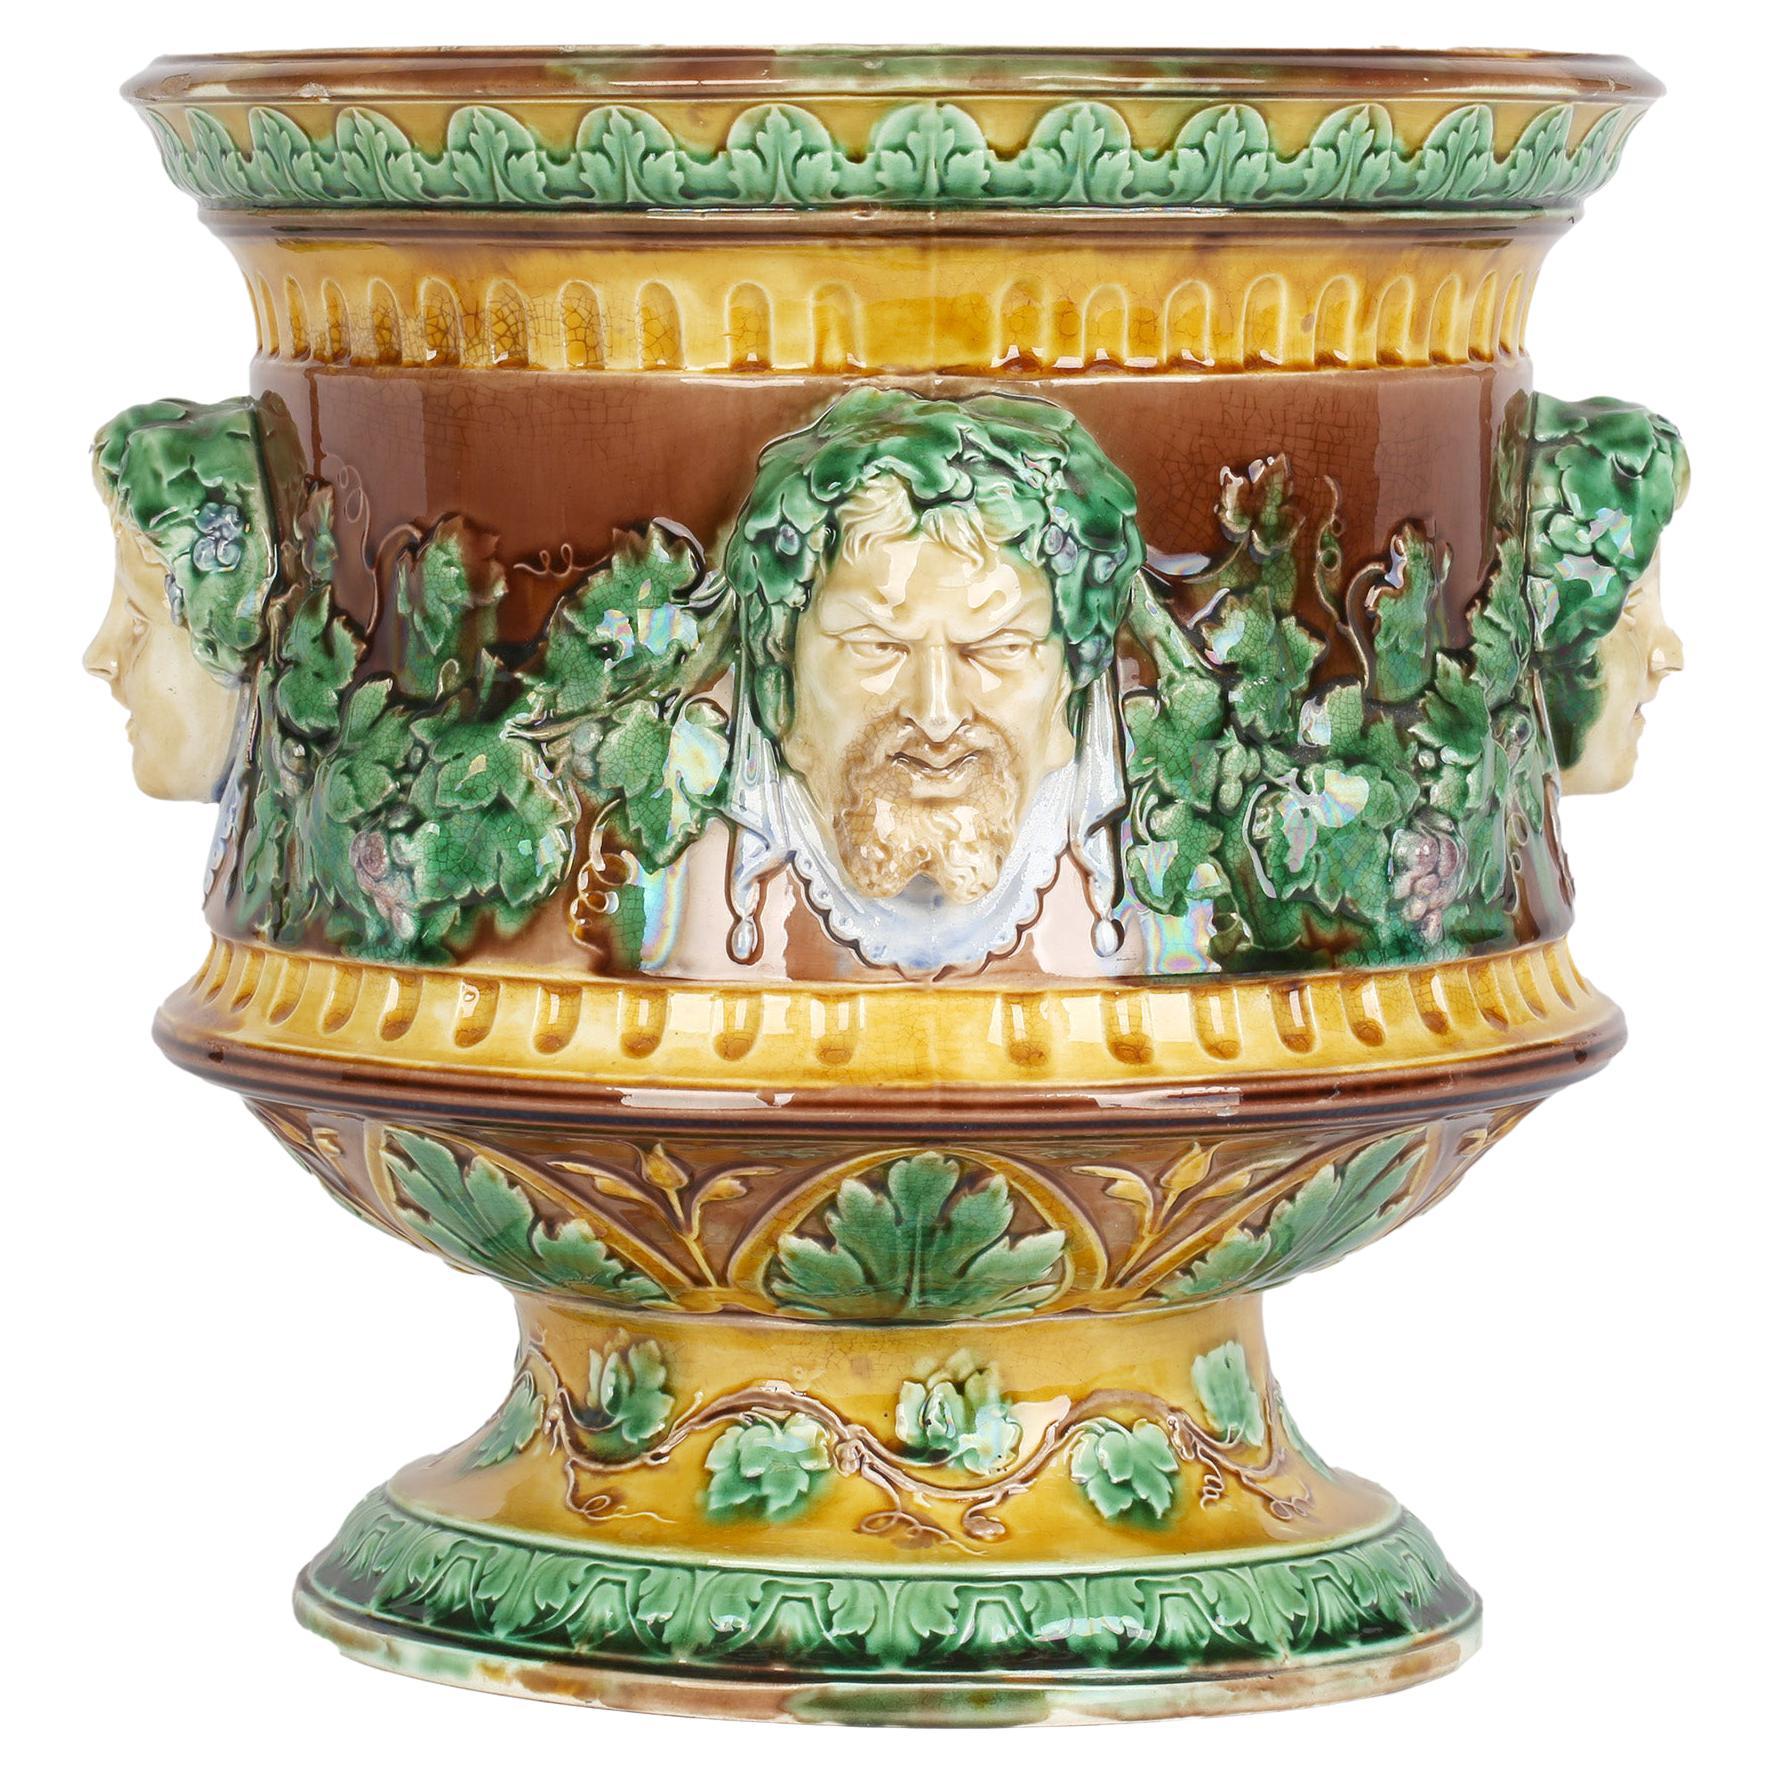 Wedgwood Large and Impressive Majolica Jardiniere with Masks and Trailing Vines